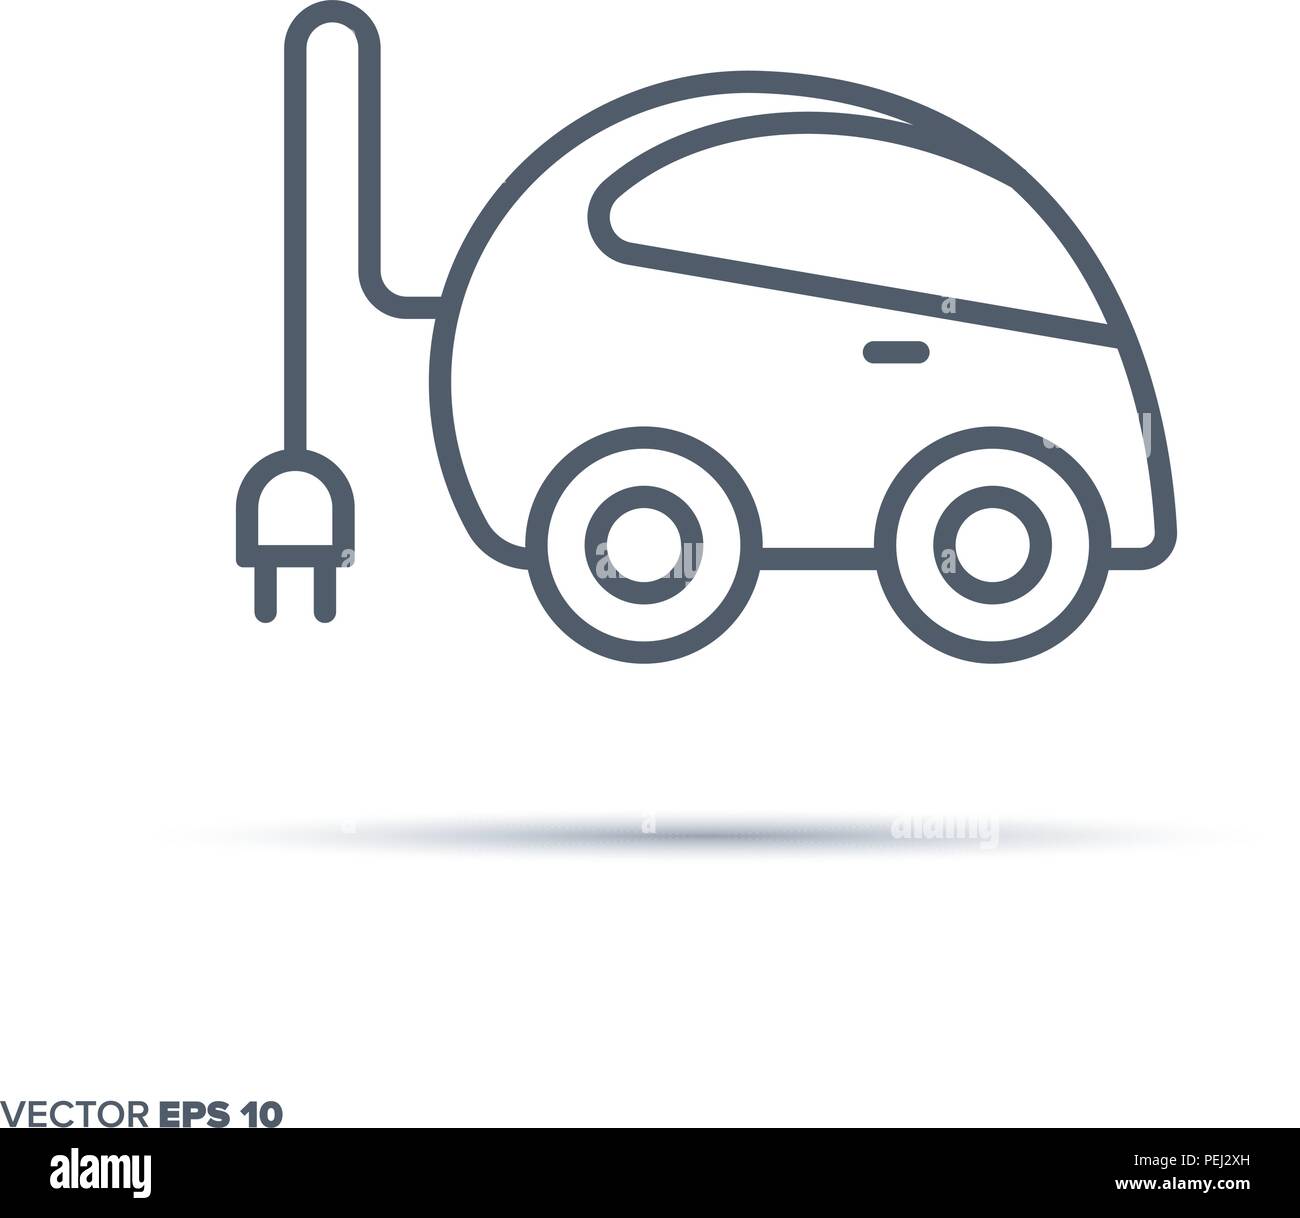 Plug-in electric compact car vector line icon. Electromobility and transportation symbol. Stock Vector